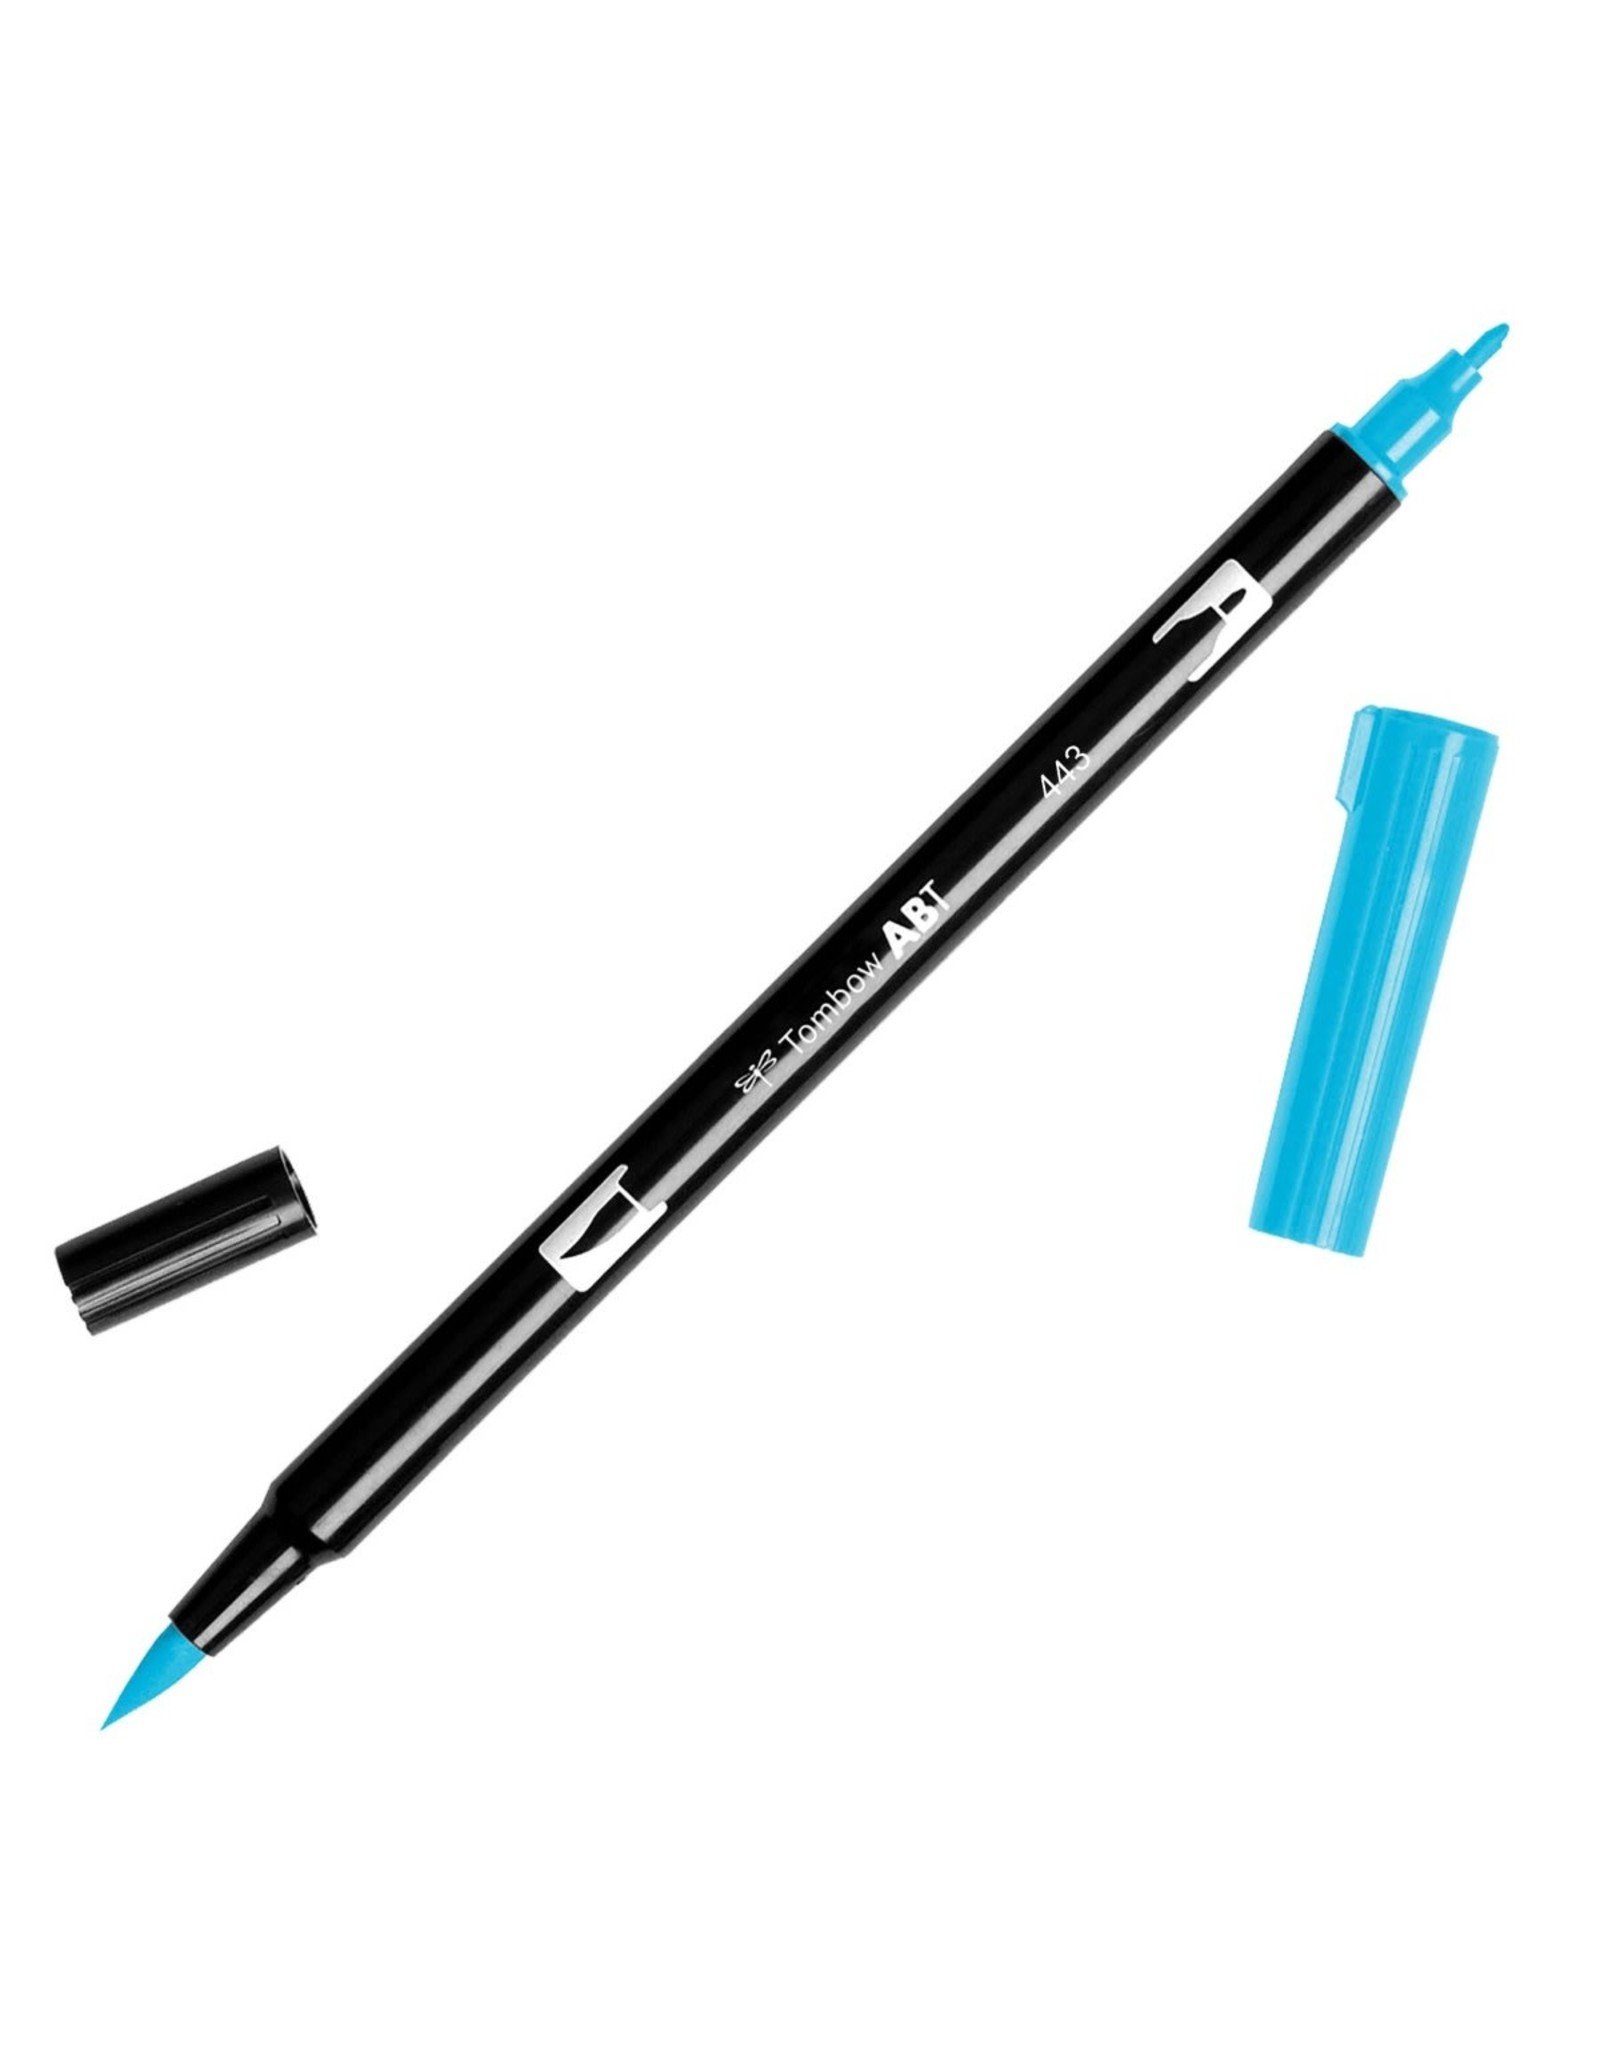 TOMBOW TOMBOW ABT-443 TURQUOISE DUAL BRUSH MARKER